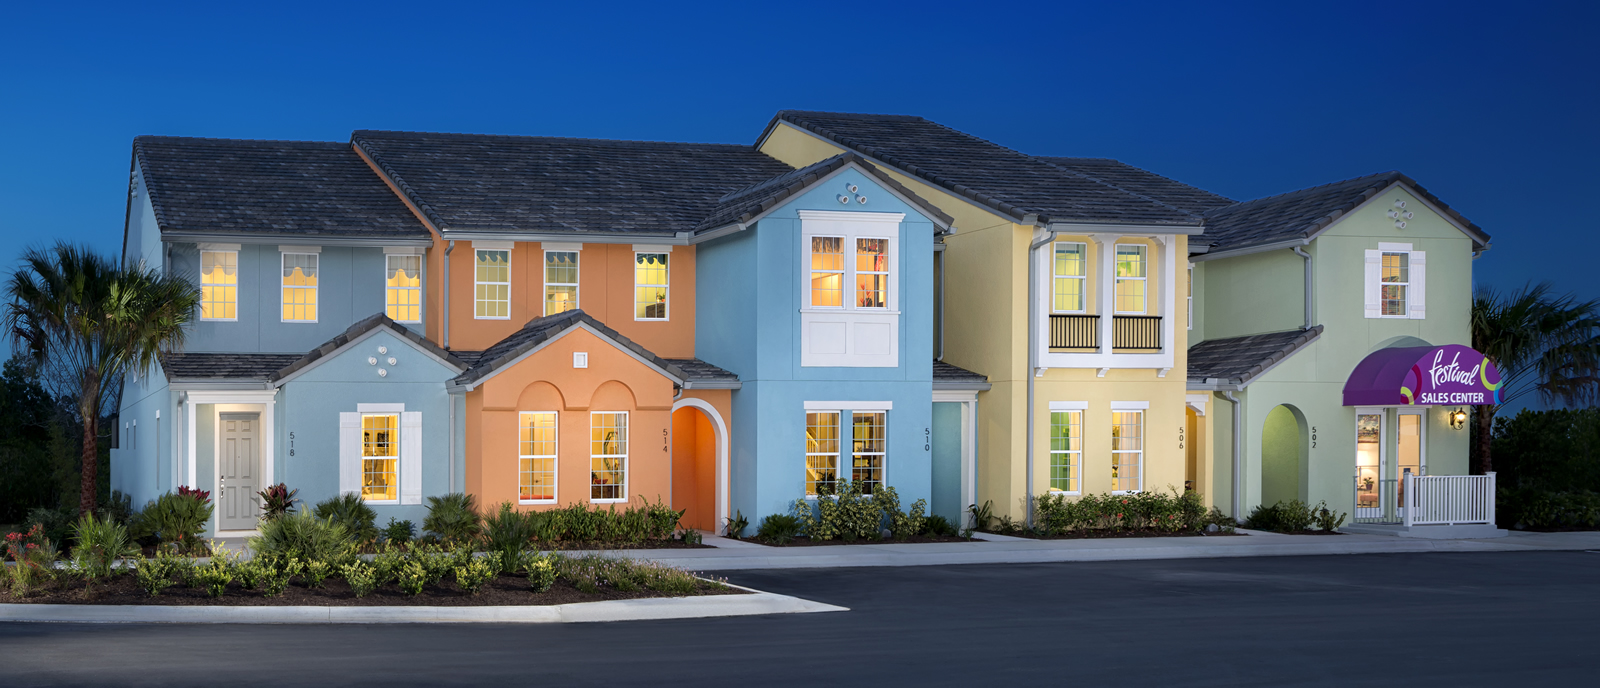 Orlando townhomes for sale in short term rental communities